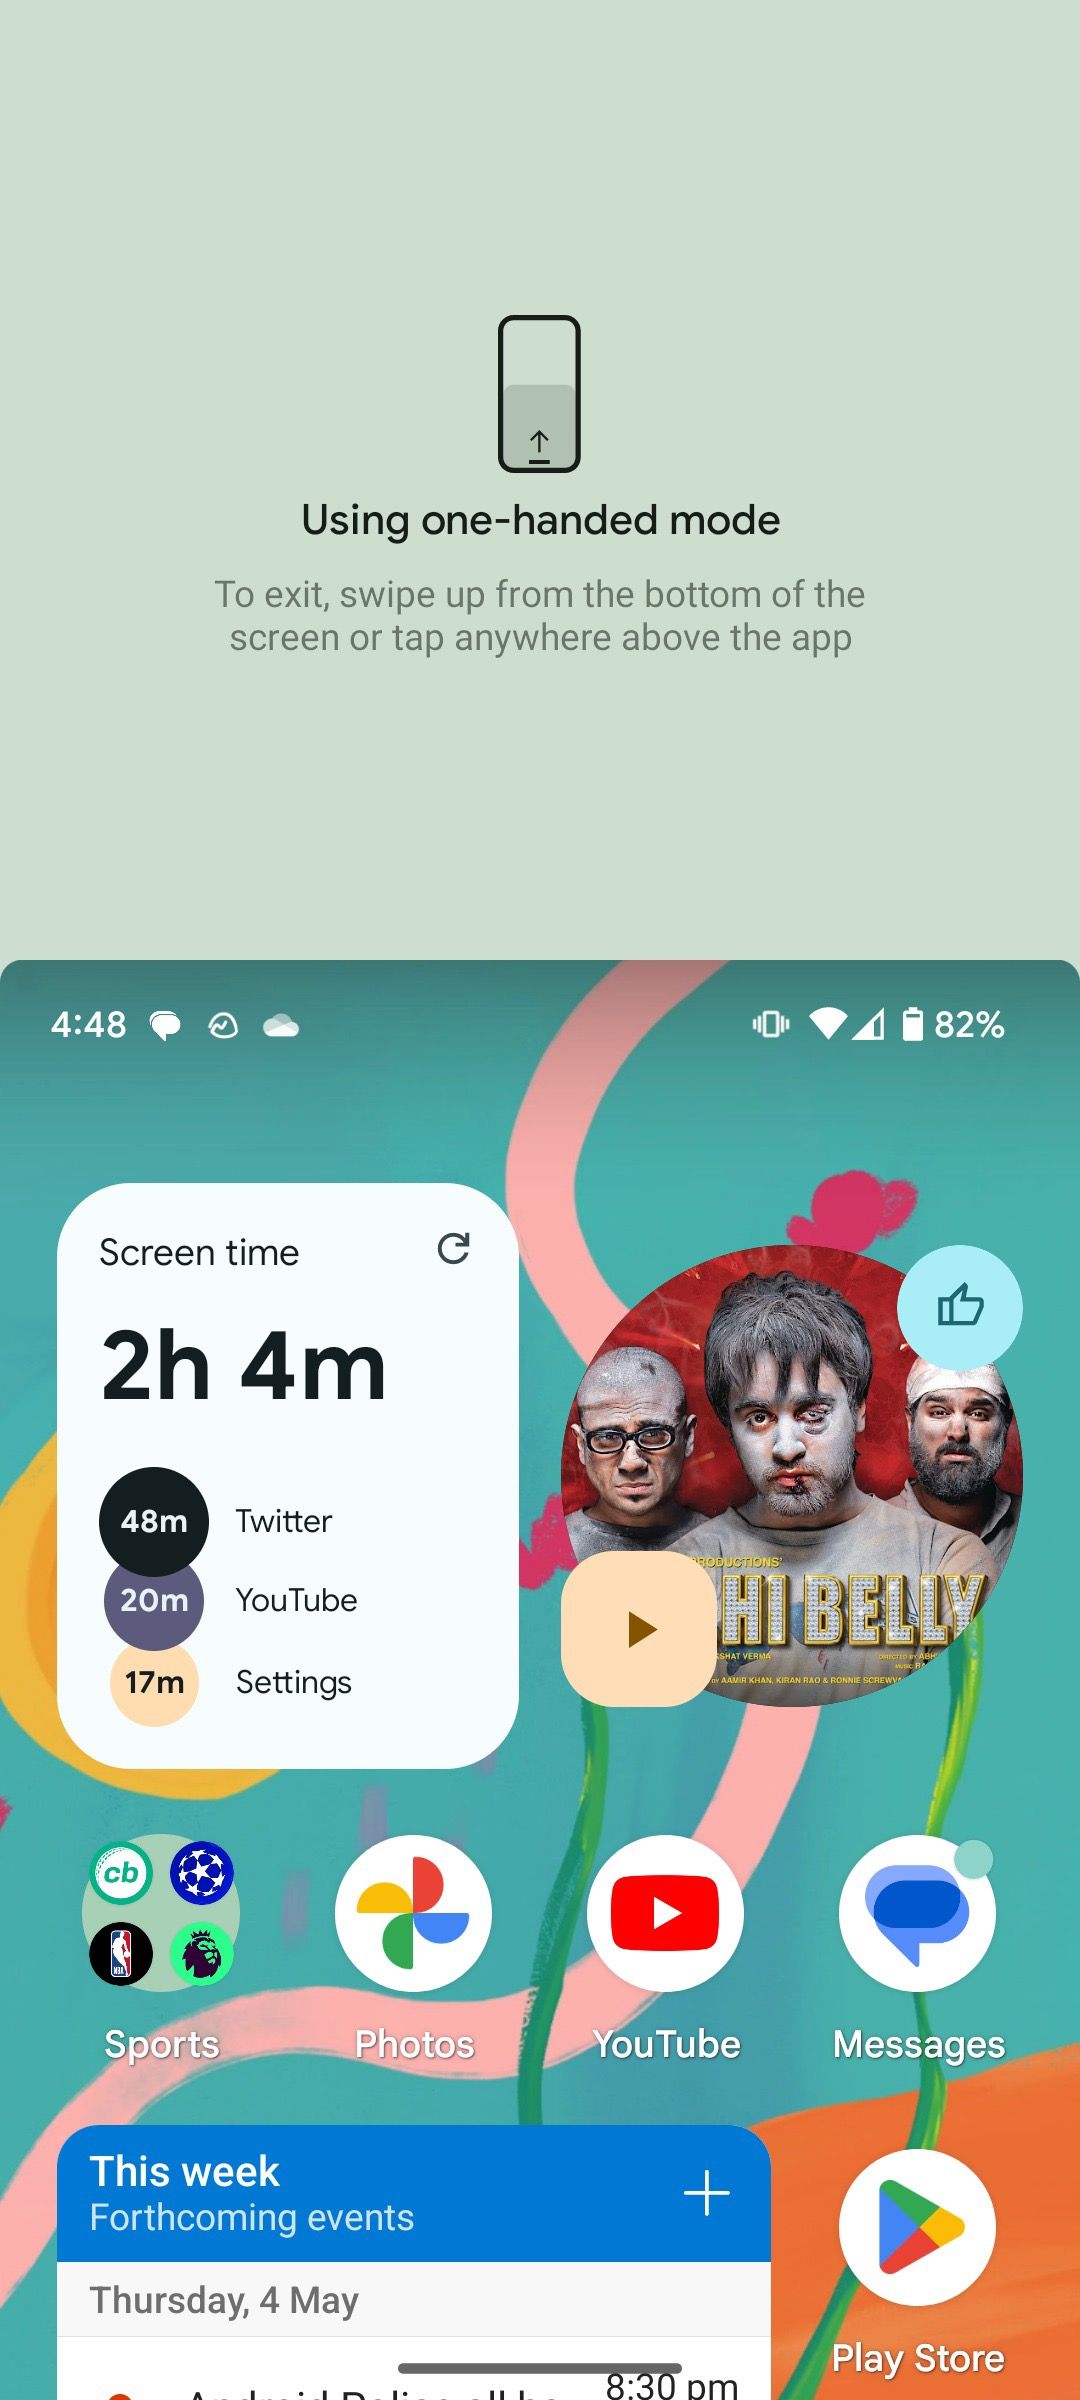 enable one-handed mode on Android